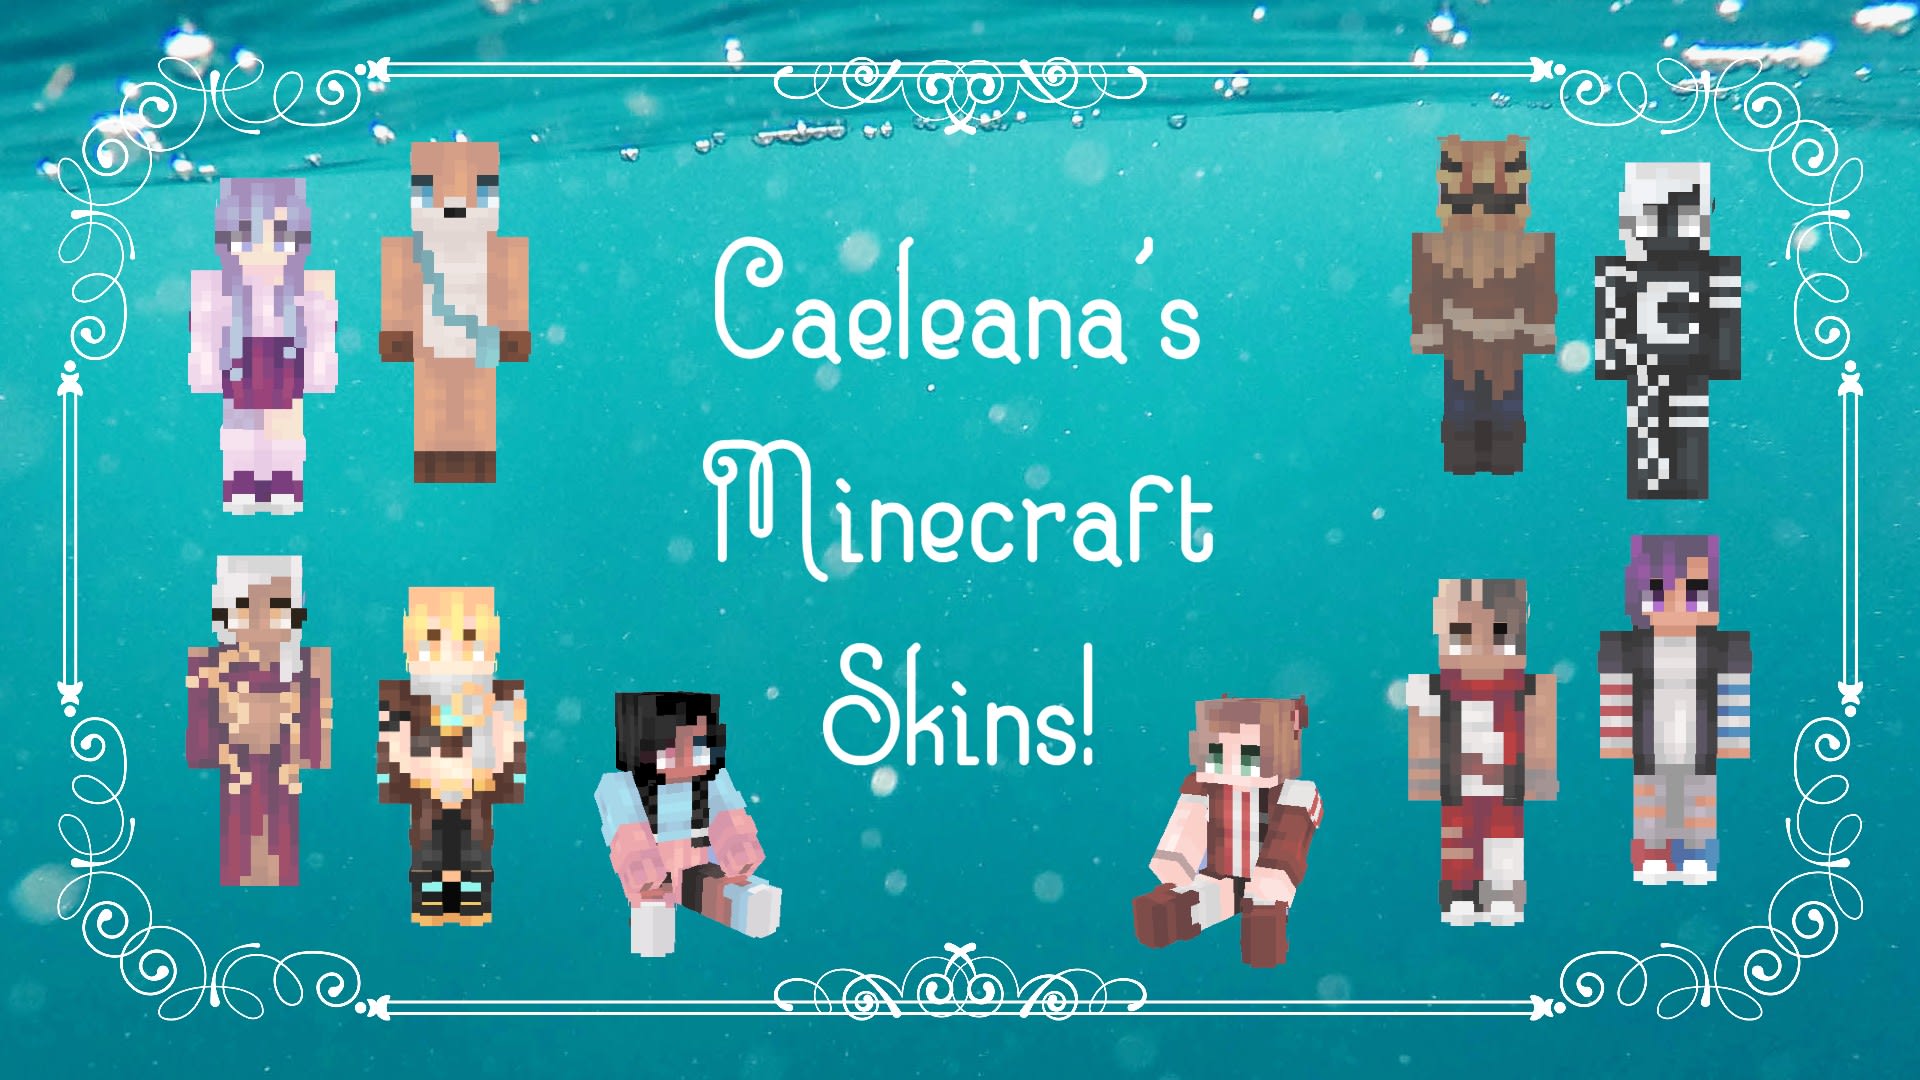 A huge collection of some of the Minecraft skins I've made the